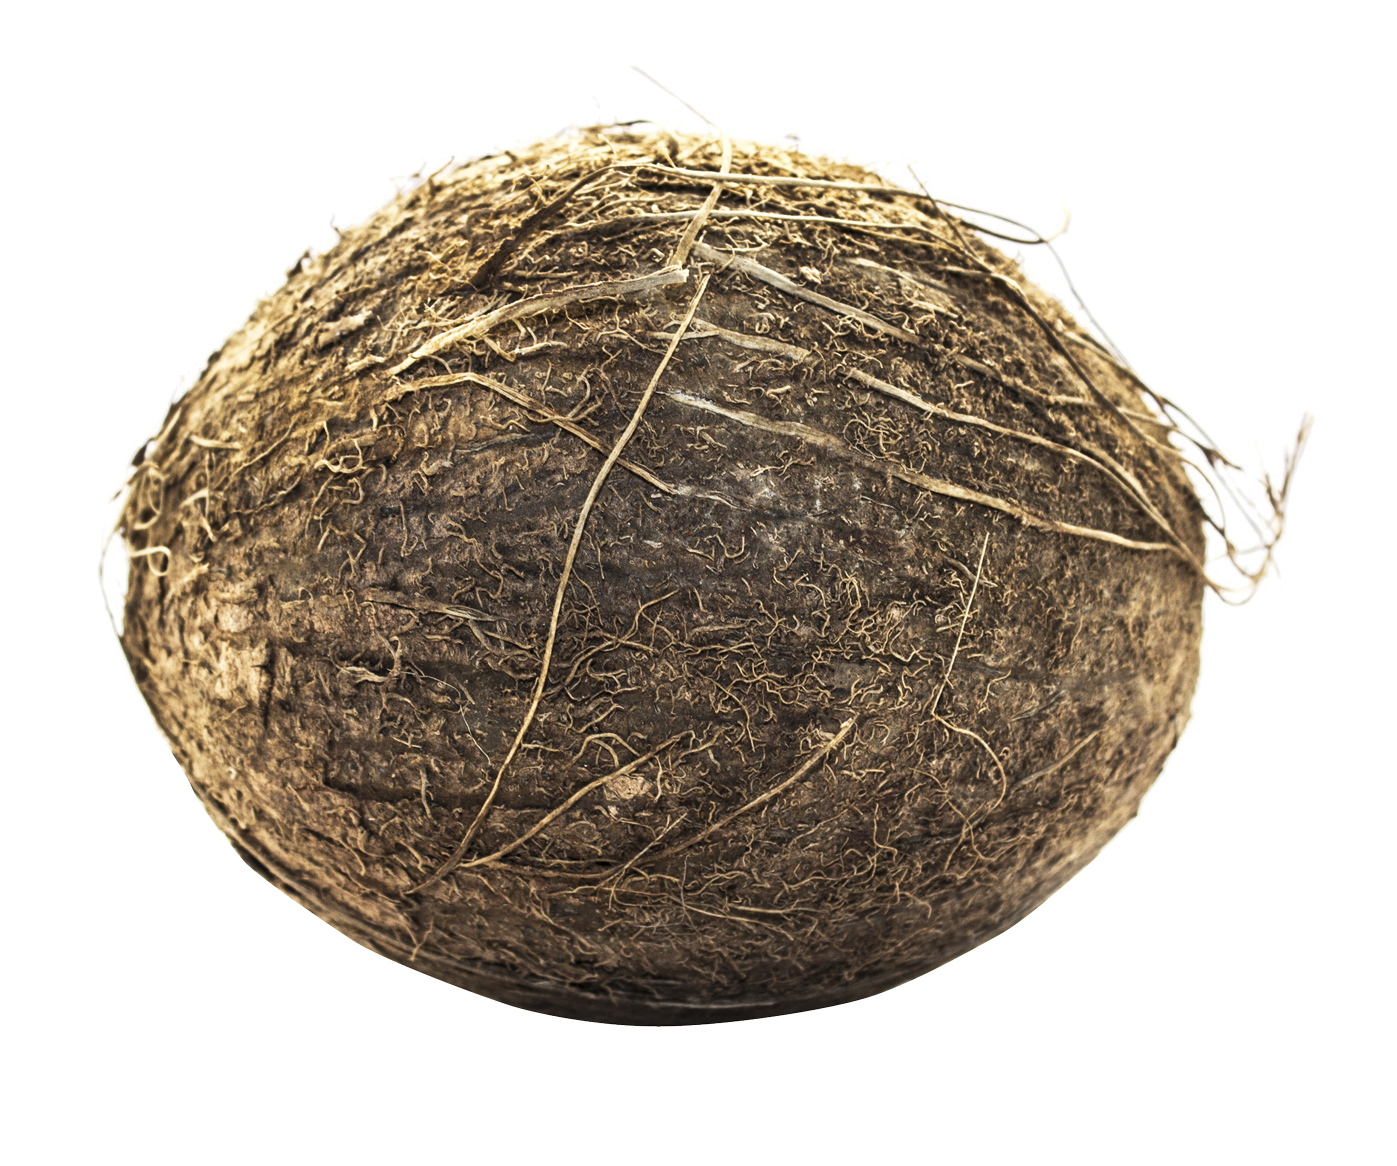 A Close Up Of A Coconut